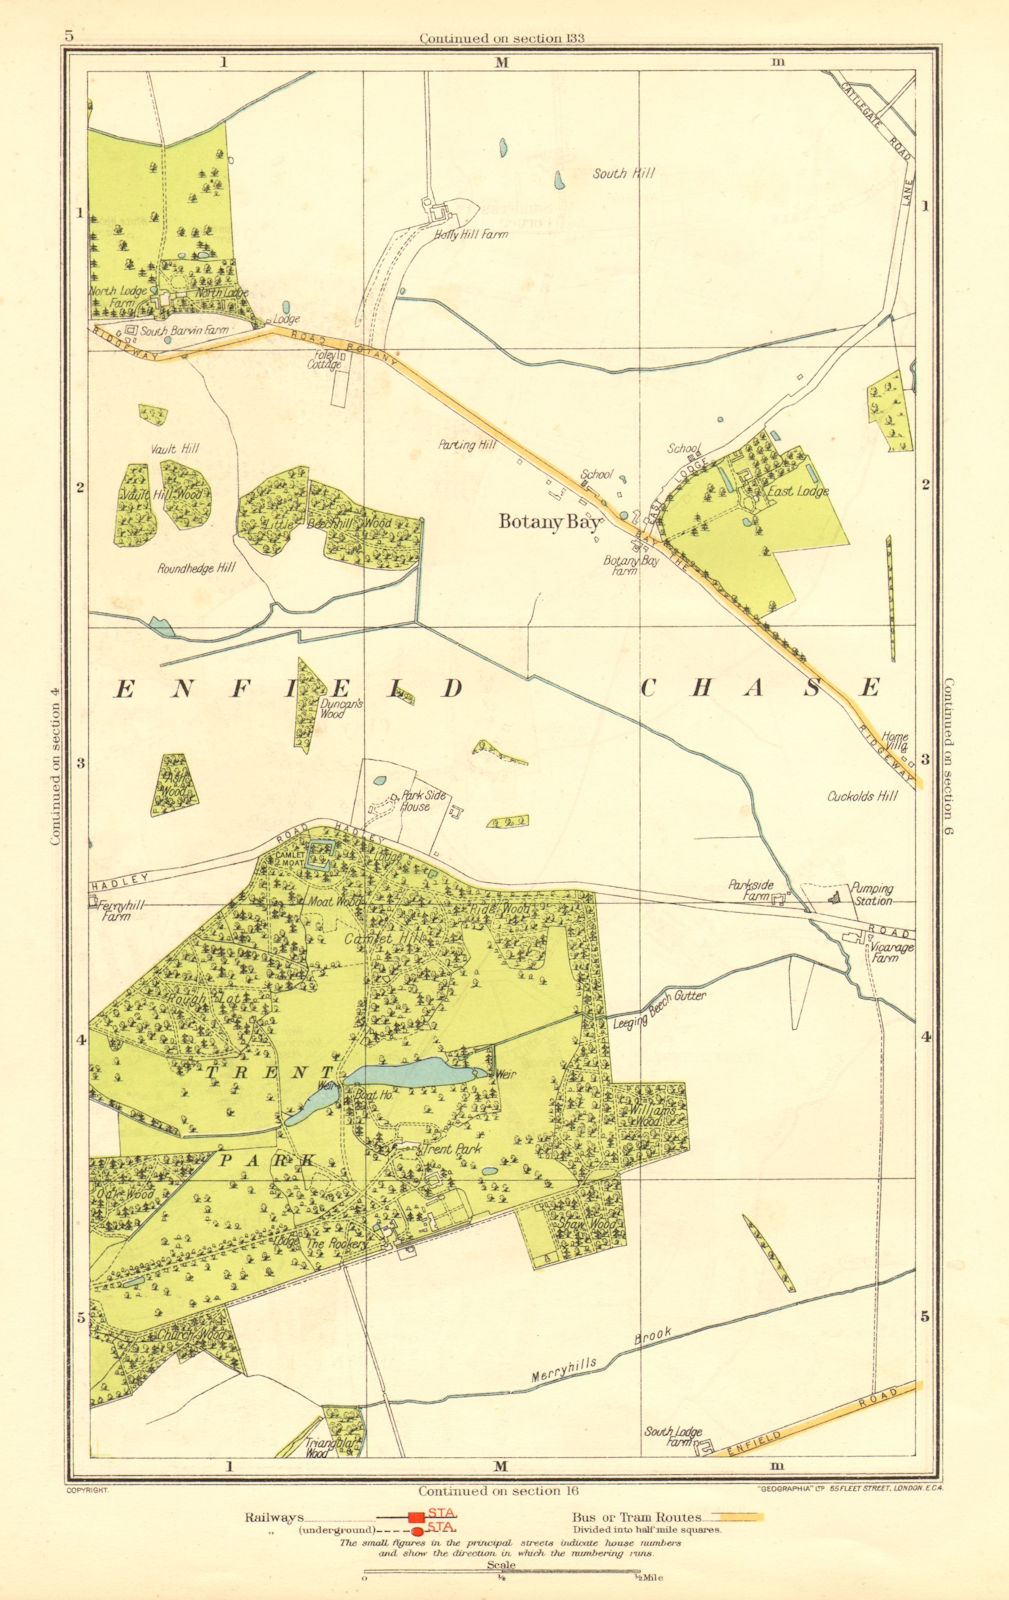 Associate Product ENFIELD CHASE. Botany Bay Trent Park Southgate East Barnet 1937 old map